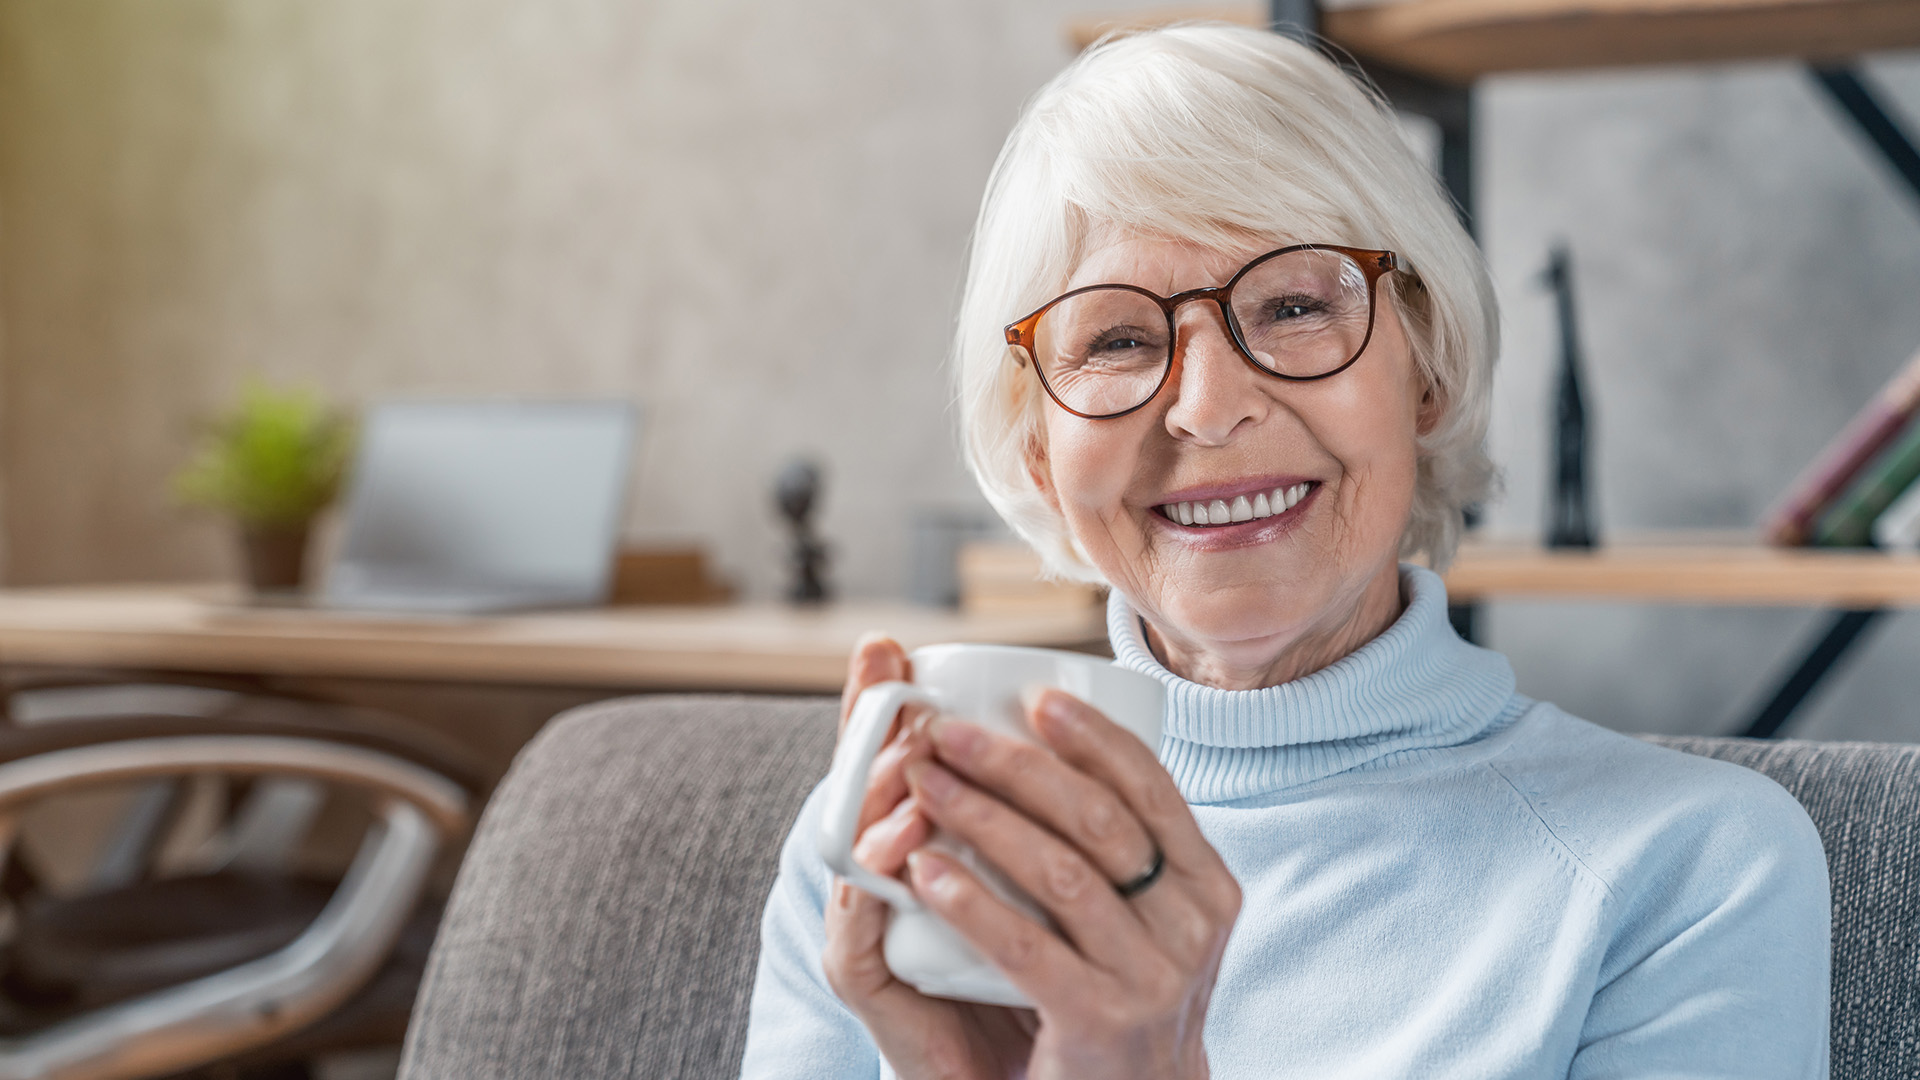 senior woman smiling and holding a coffee cup on the couch